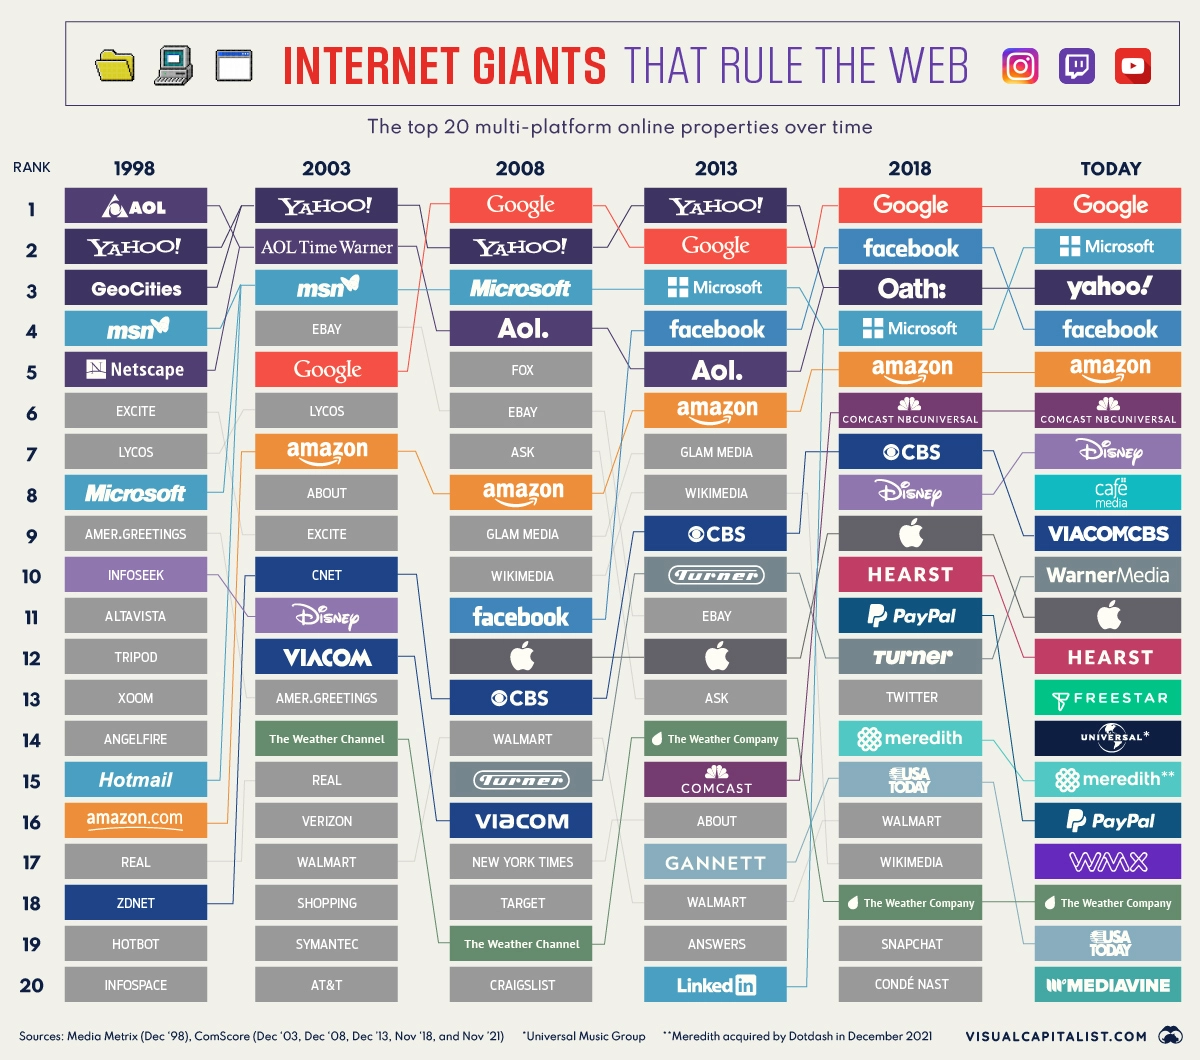 The-20-Internet-Giants-That-Rule-the-Web